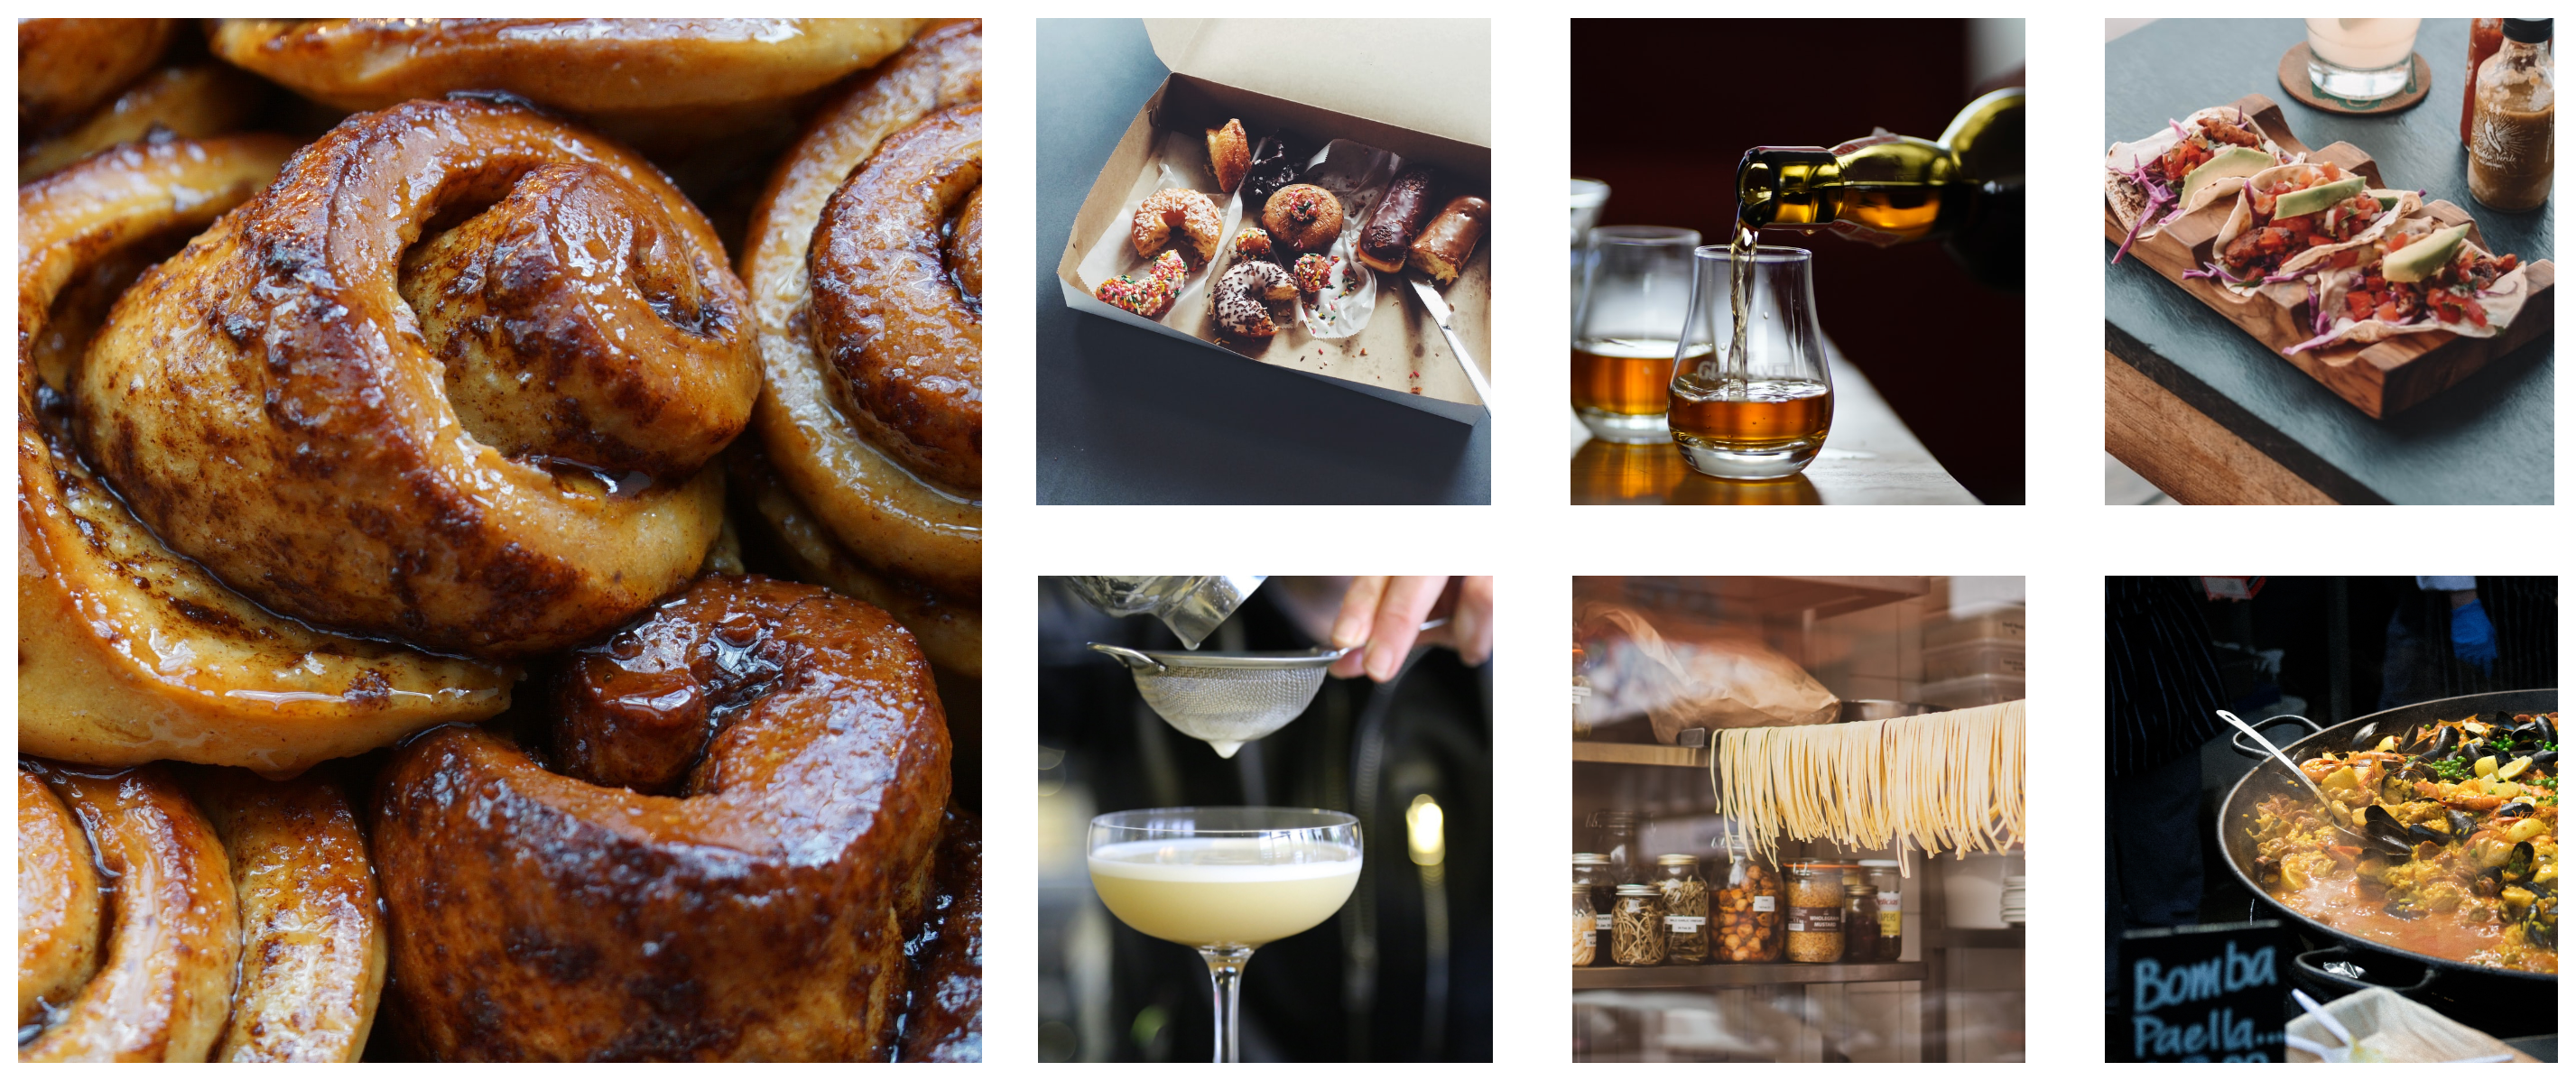 a collage of 7 food images, from top left to bottom right, donuts in a box, whiskey being poured into a glass, colourful Mexican tacos, fresh cinamon buns, a pornstar martini being strained, fresh pasta drying on a rack, and a fragrant muscle broth in a large pan